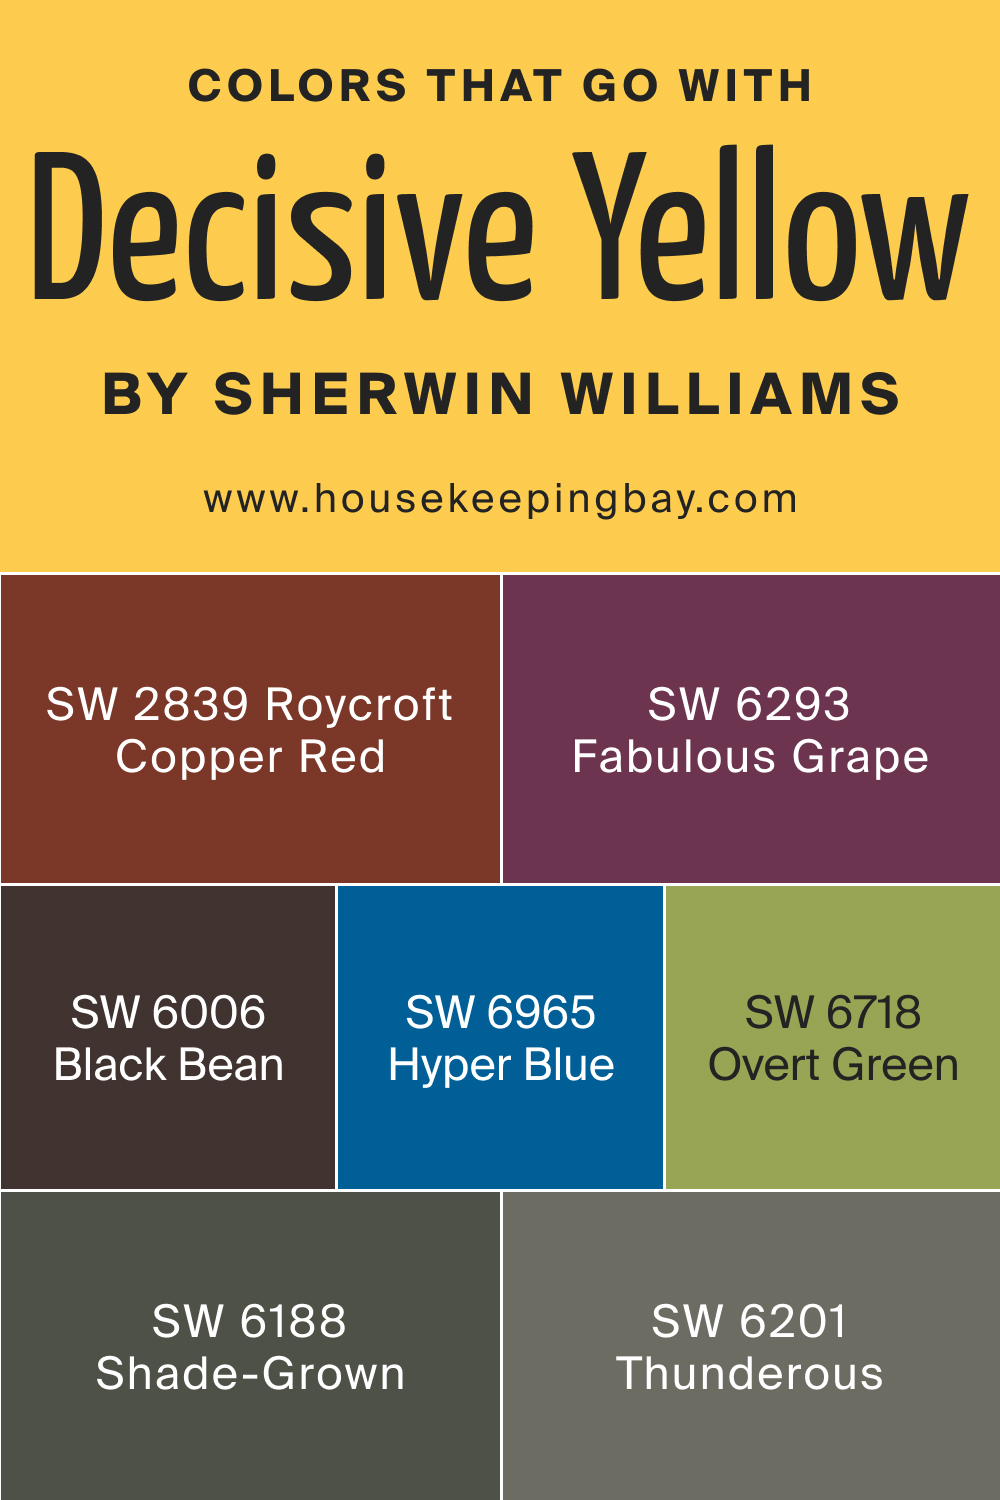 Colors that go with Decisive Yellow SW 6902 by Sherwin Williams